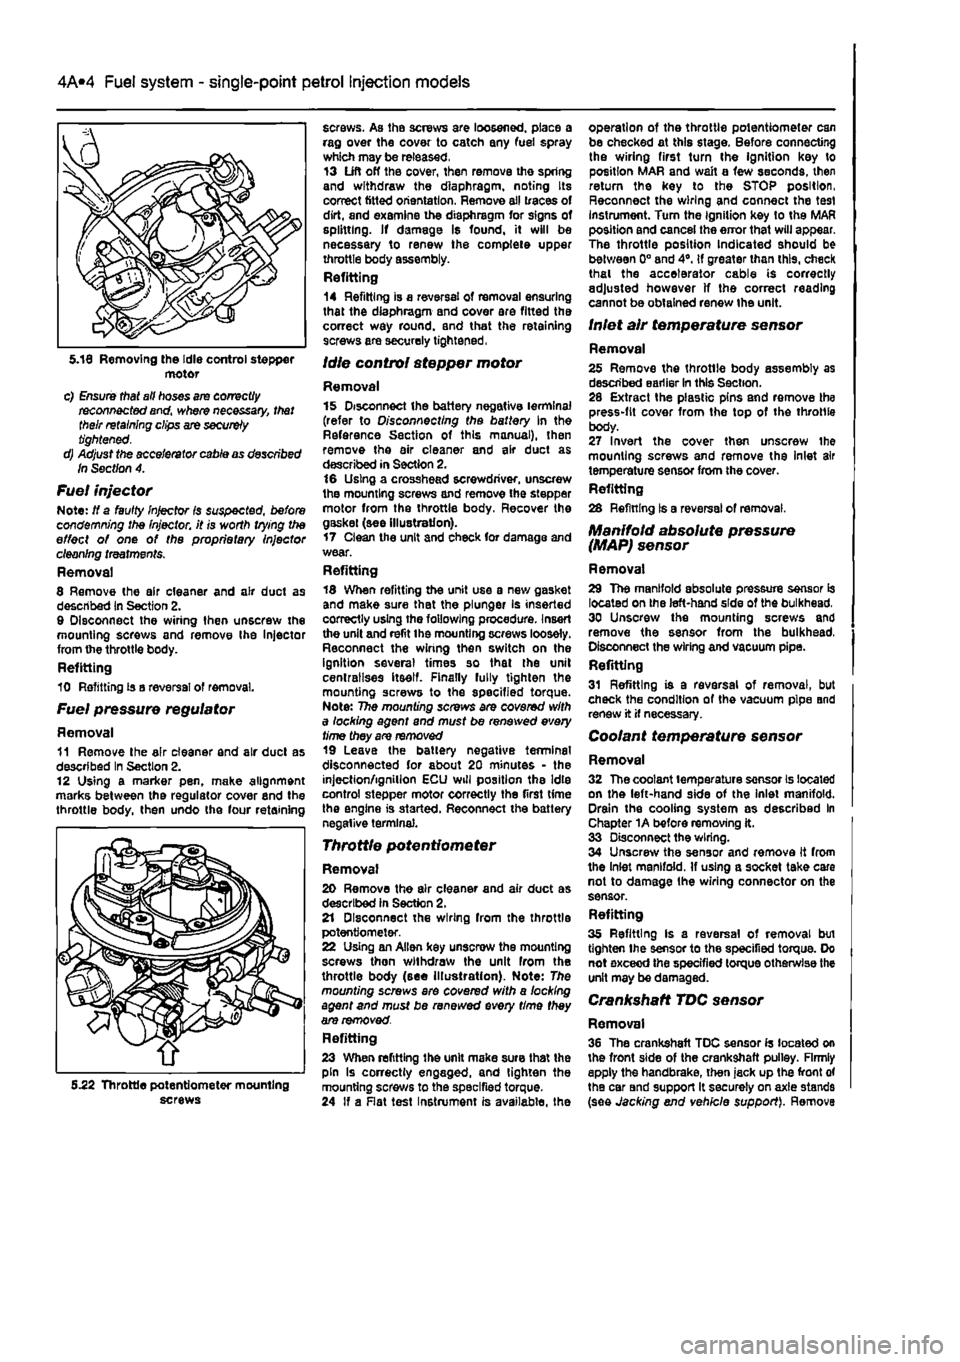 FIAT PUNTO 1995 176 / 1.G Workshop Manual 
4A*2 Fuel system - single-point petrol Injection models 
motor c) Ensure that all hoses are correctly reconnected and, where necessary, that their retaining clips are securely tightened. d) Adjust th